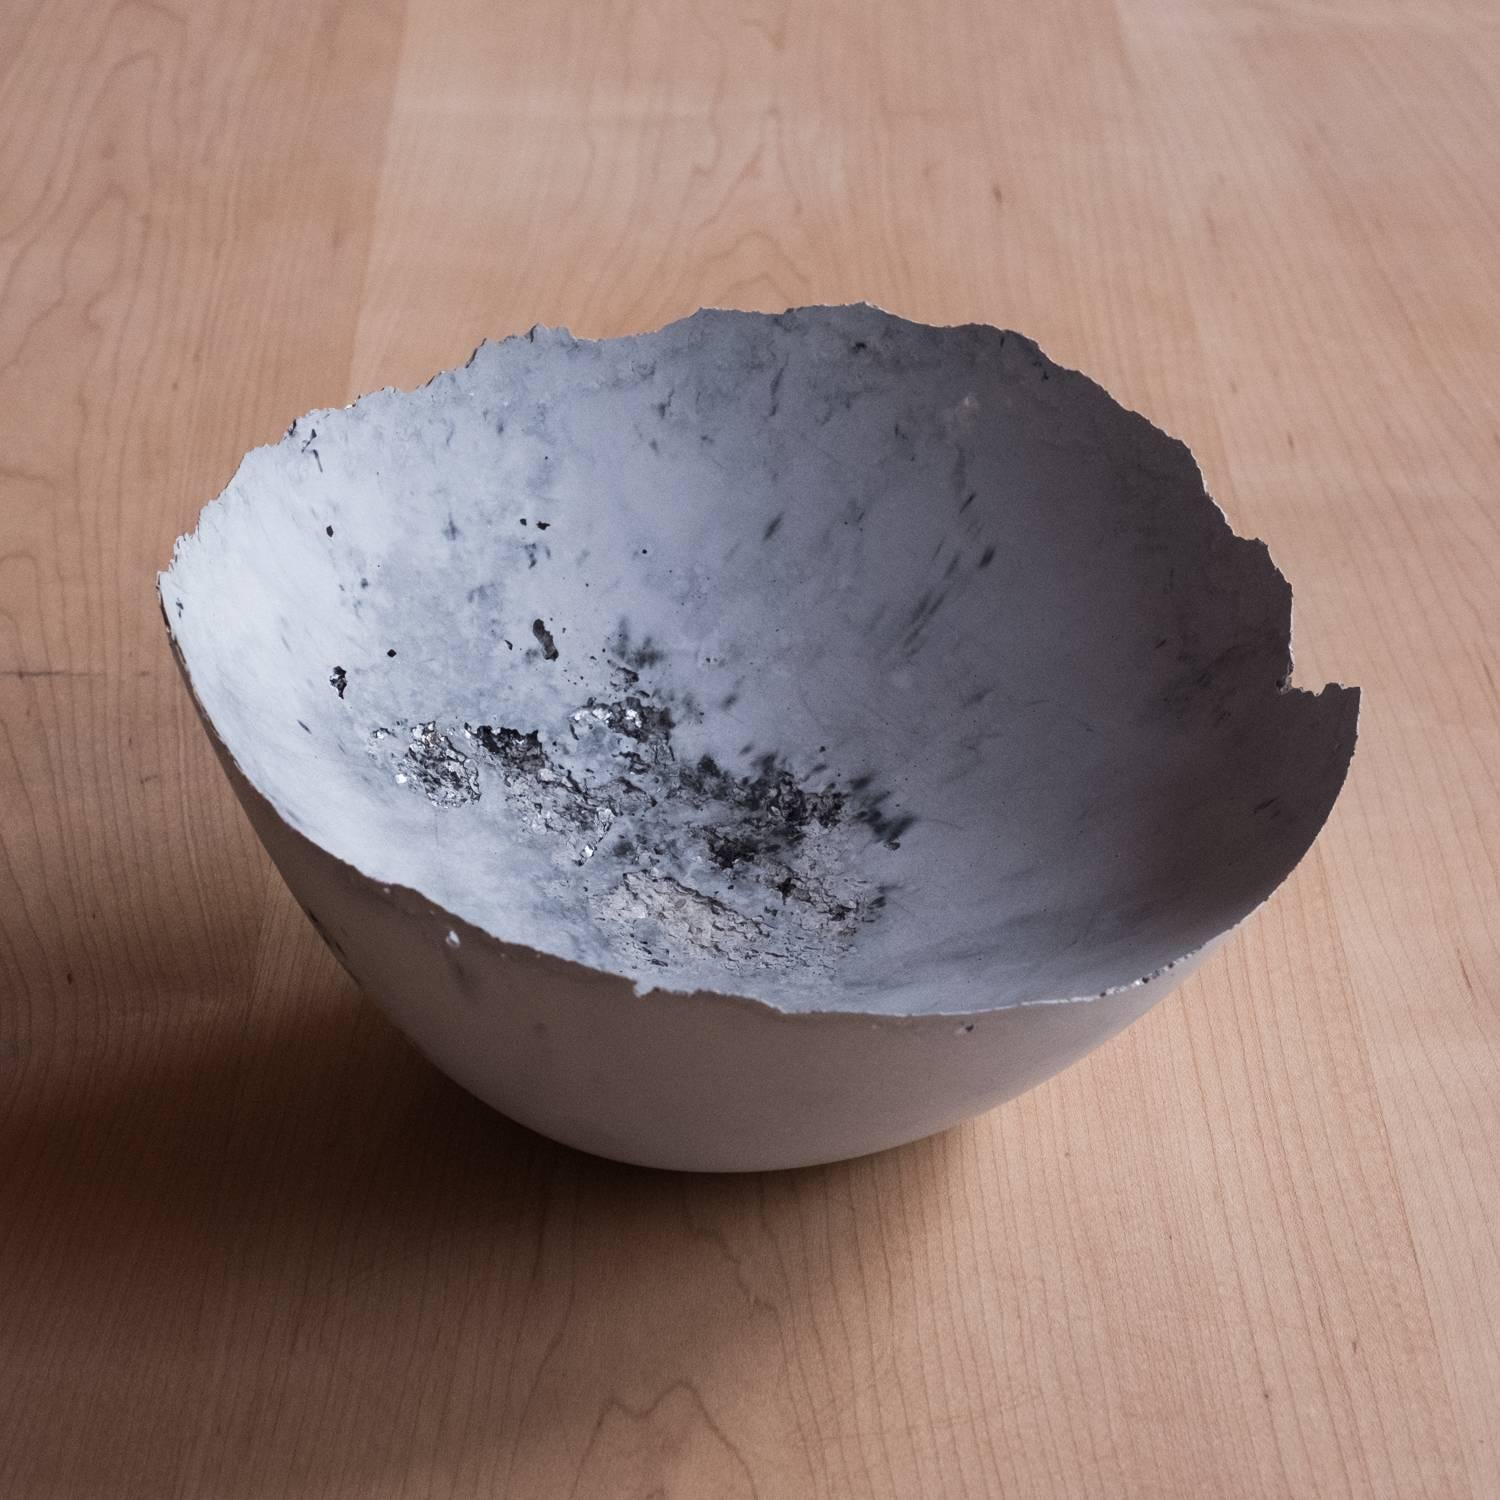 A collection of 236 unique bowls, the Concrete Series by UMÉ Studio expresses the tension between heavy concrete and its delicate edge generated by hand pouring. While one assumes concrete should be strong and durable, it is, at its core, fragile.